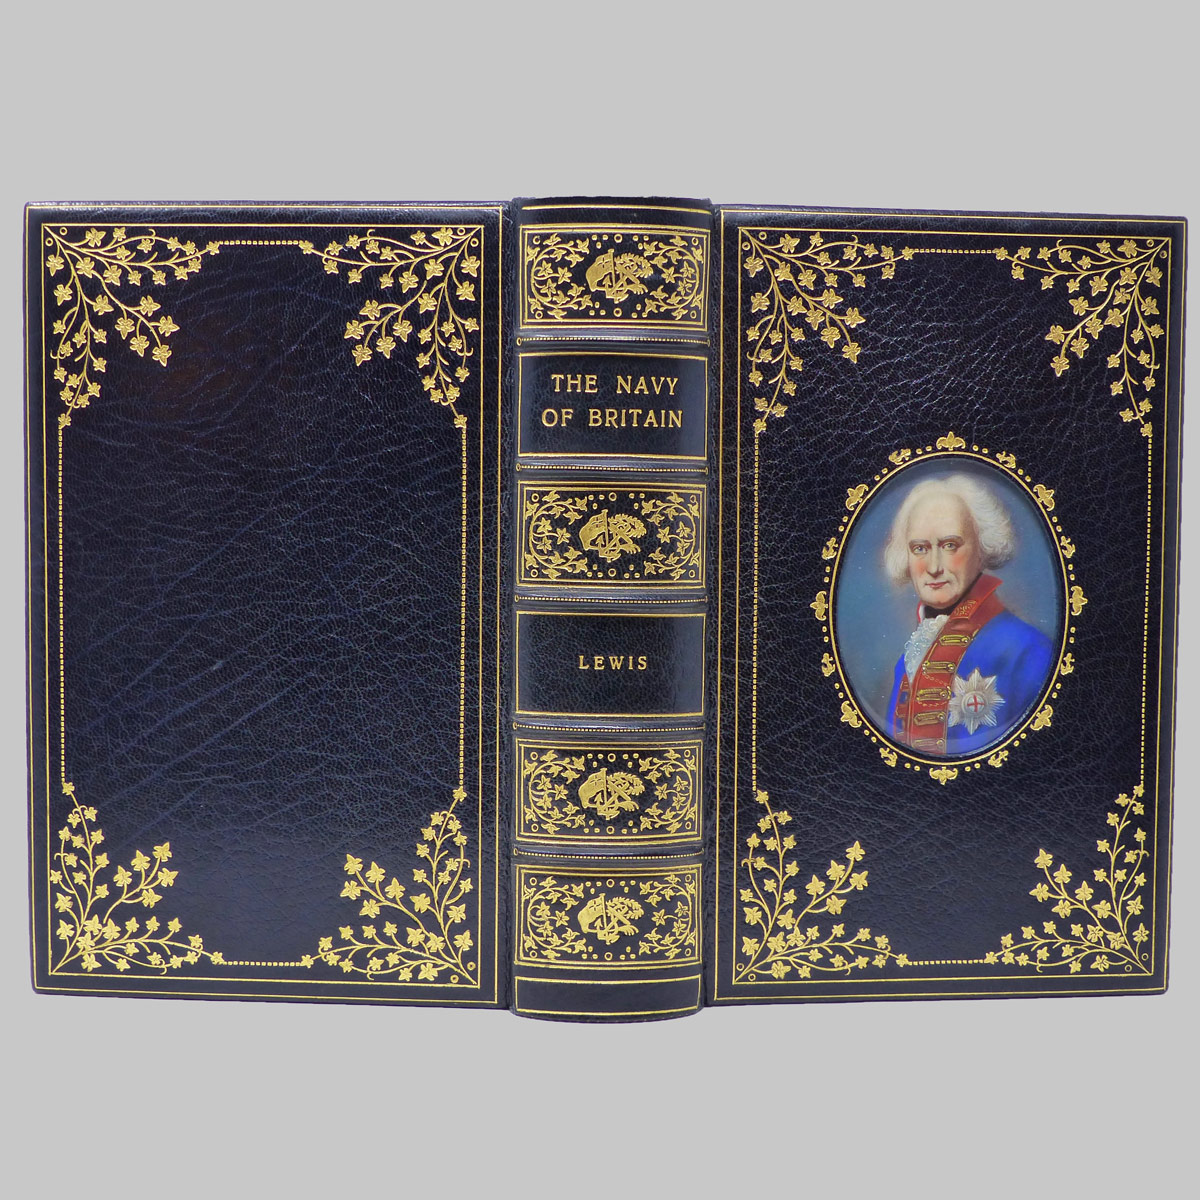 The Navy of Britain. A Historical Portrait. By Professor Michael Lewis.

First Edition in a Cosway-Style Binding by Bayntun Riviere with Unique Provenance.

Link in Bio. 

#rarebook #firstedition #illustratedbook #bookcollector #britishnavy  #finebinding #royalnavy